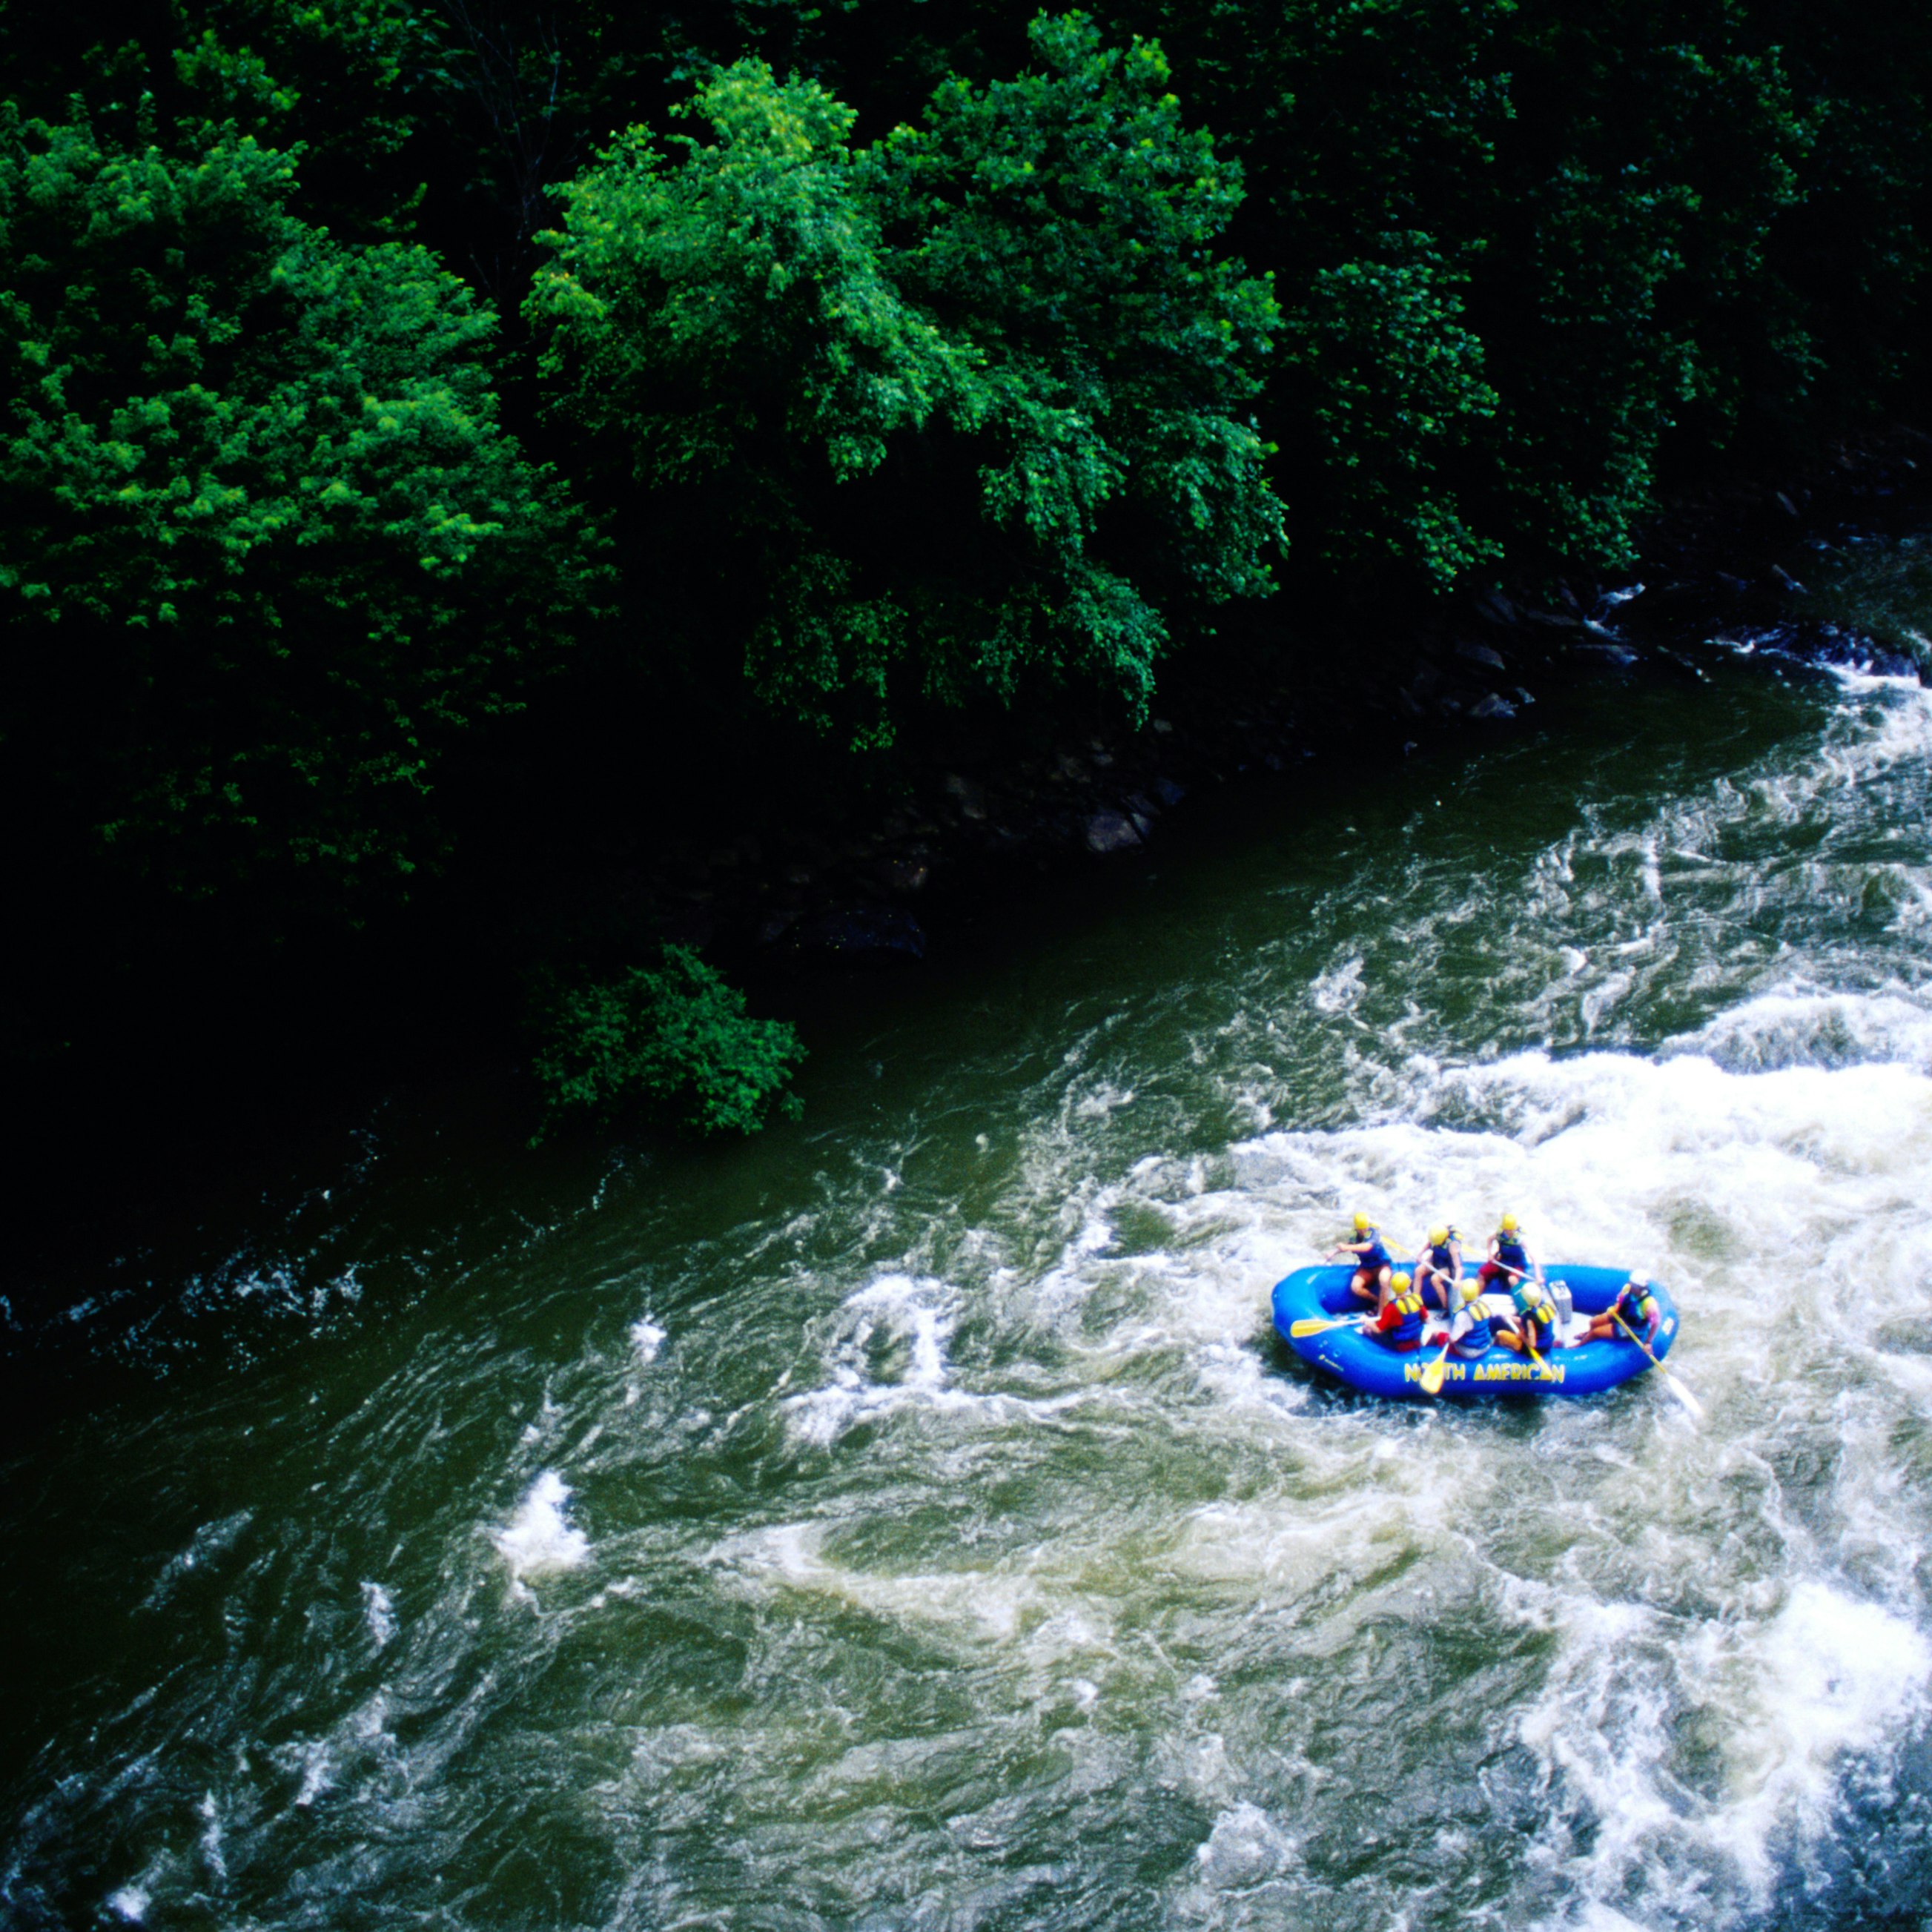 Rafters on the New River in West Virginia